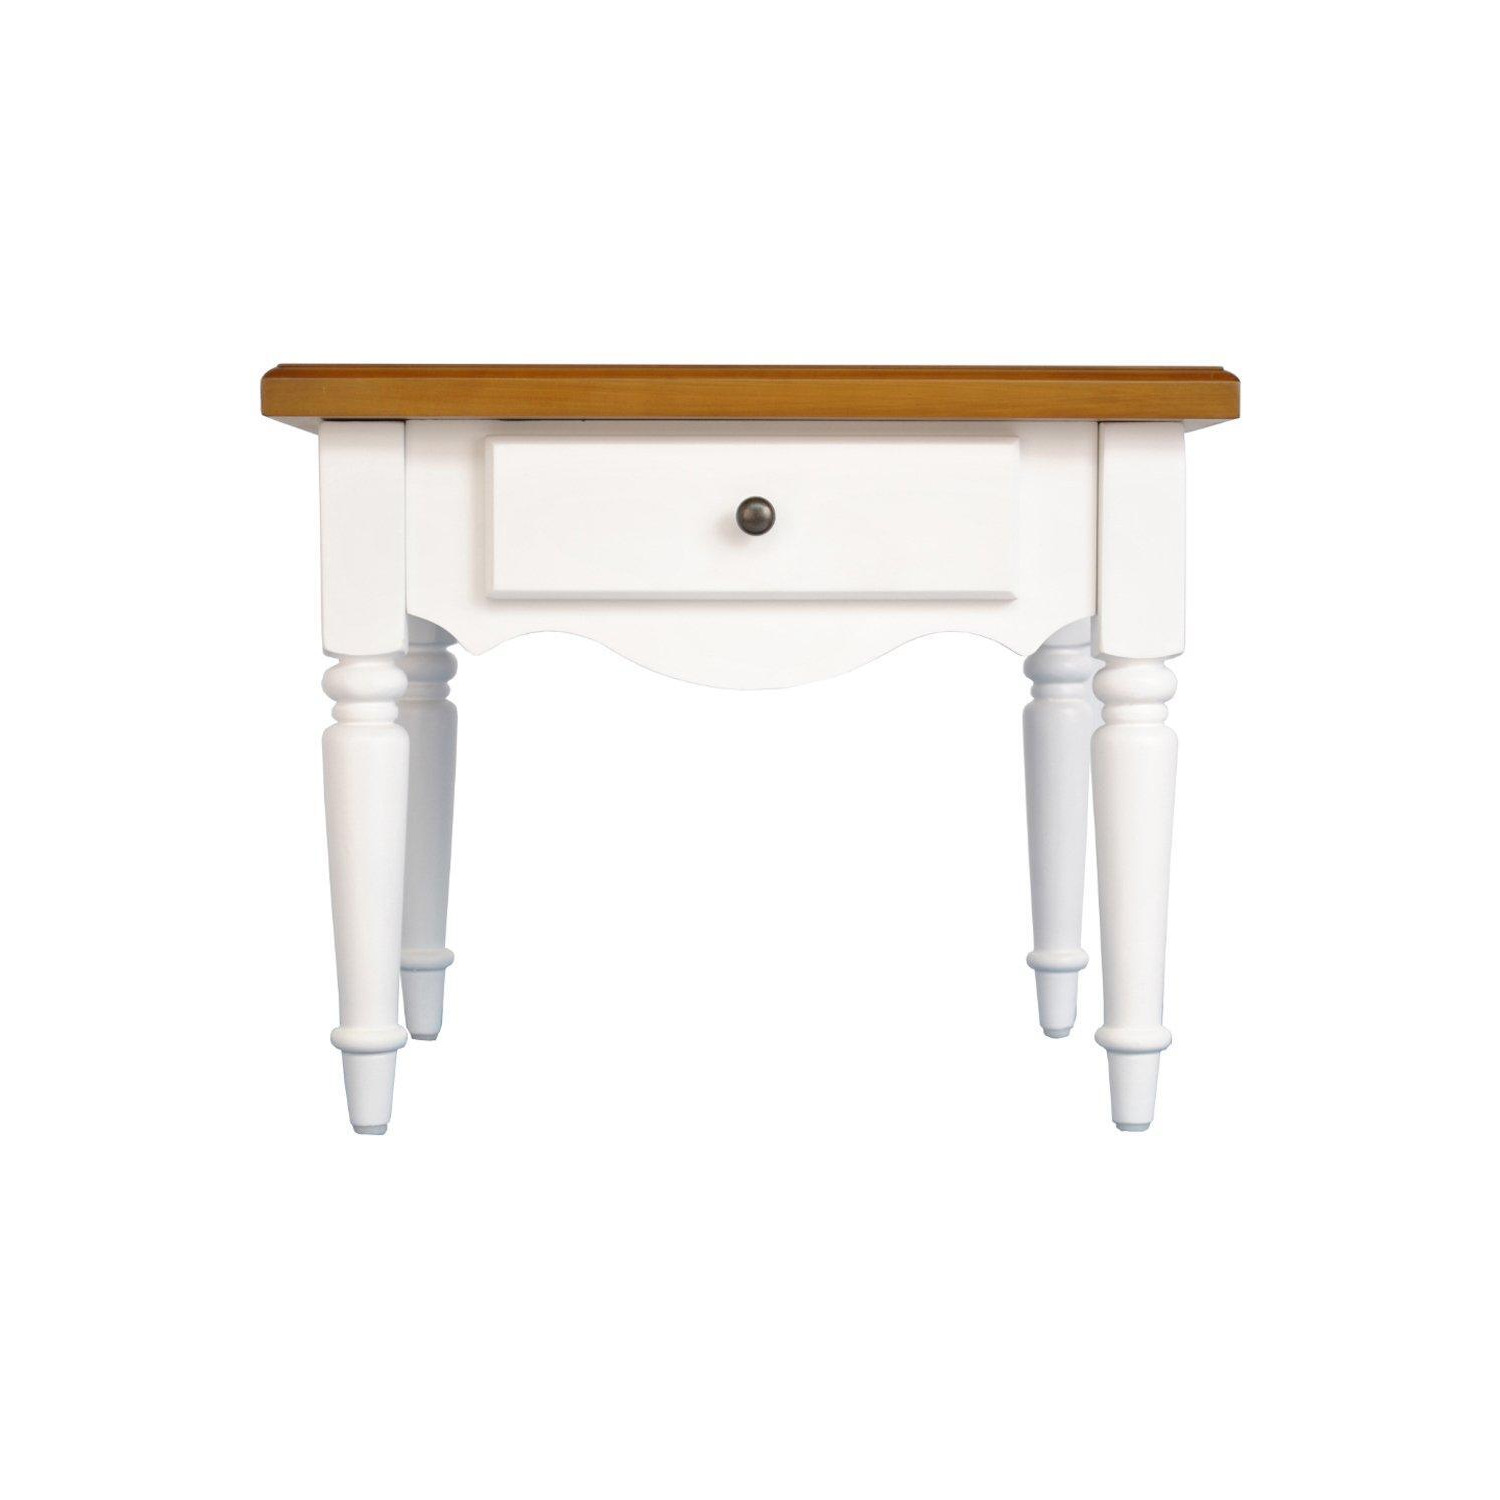 'Country' - Solid Wood Side / End / Bedside Table With Drawer - White / Pine - image 1